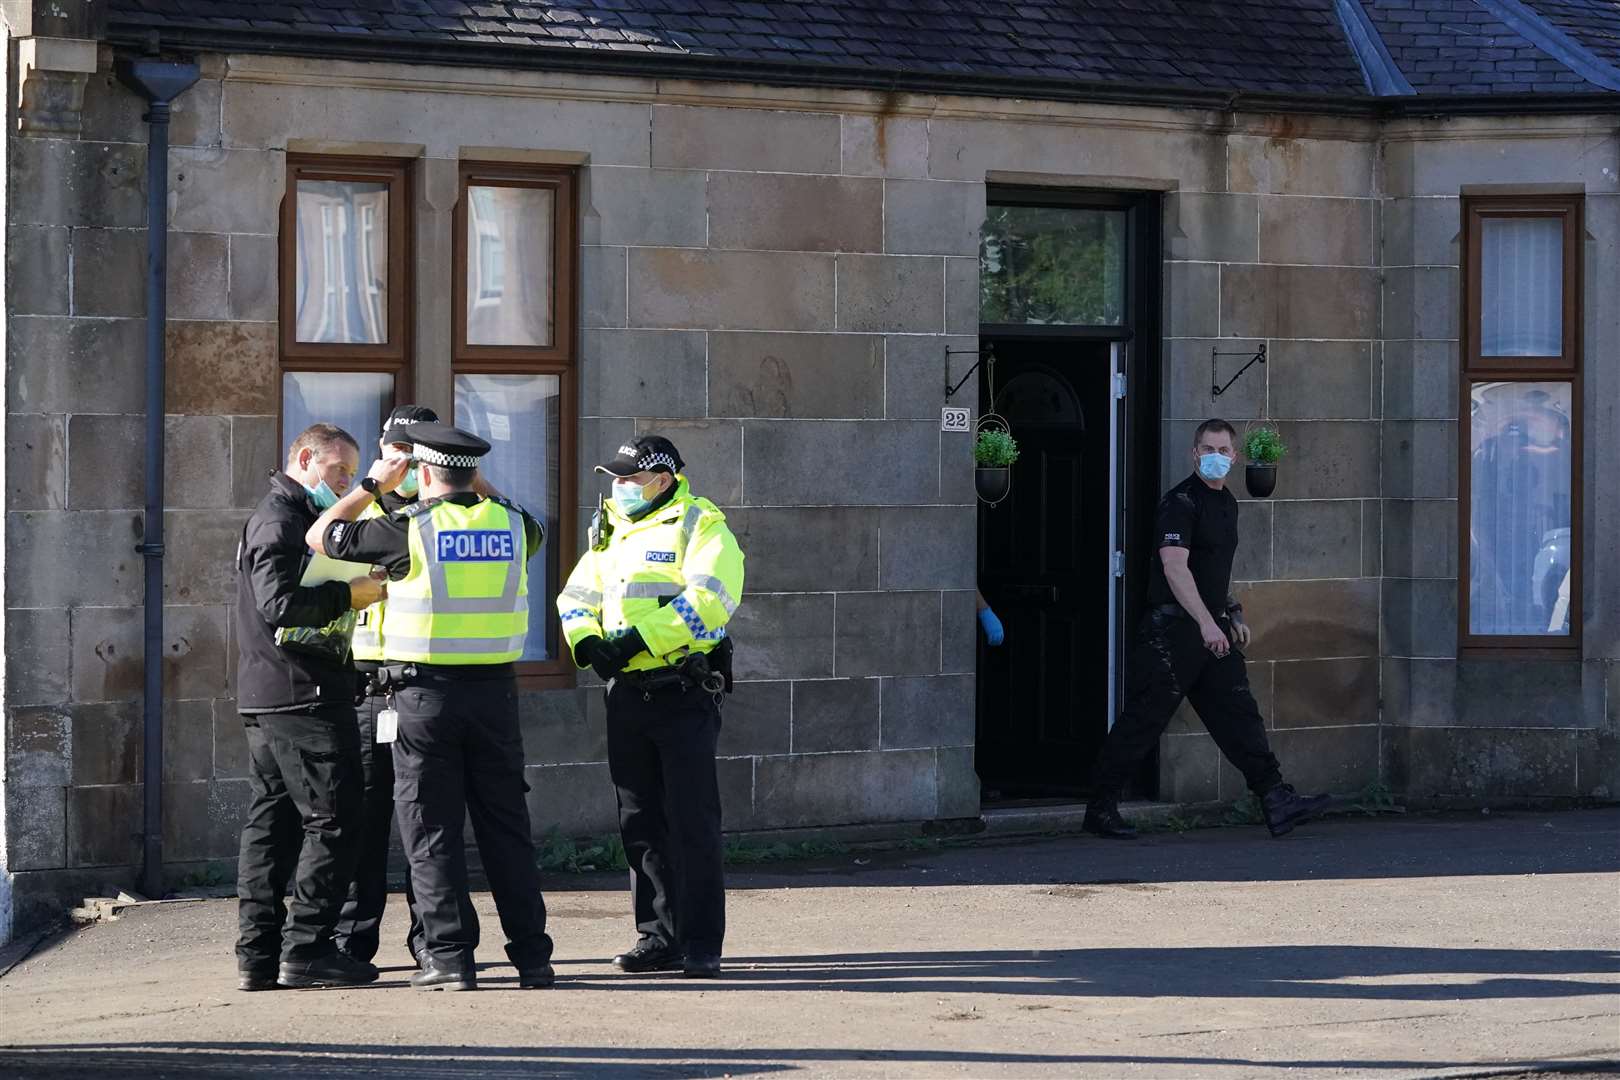 Police searched Carson’s grandmother’s home in New Cumnock (Andrew Milligan/PA)